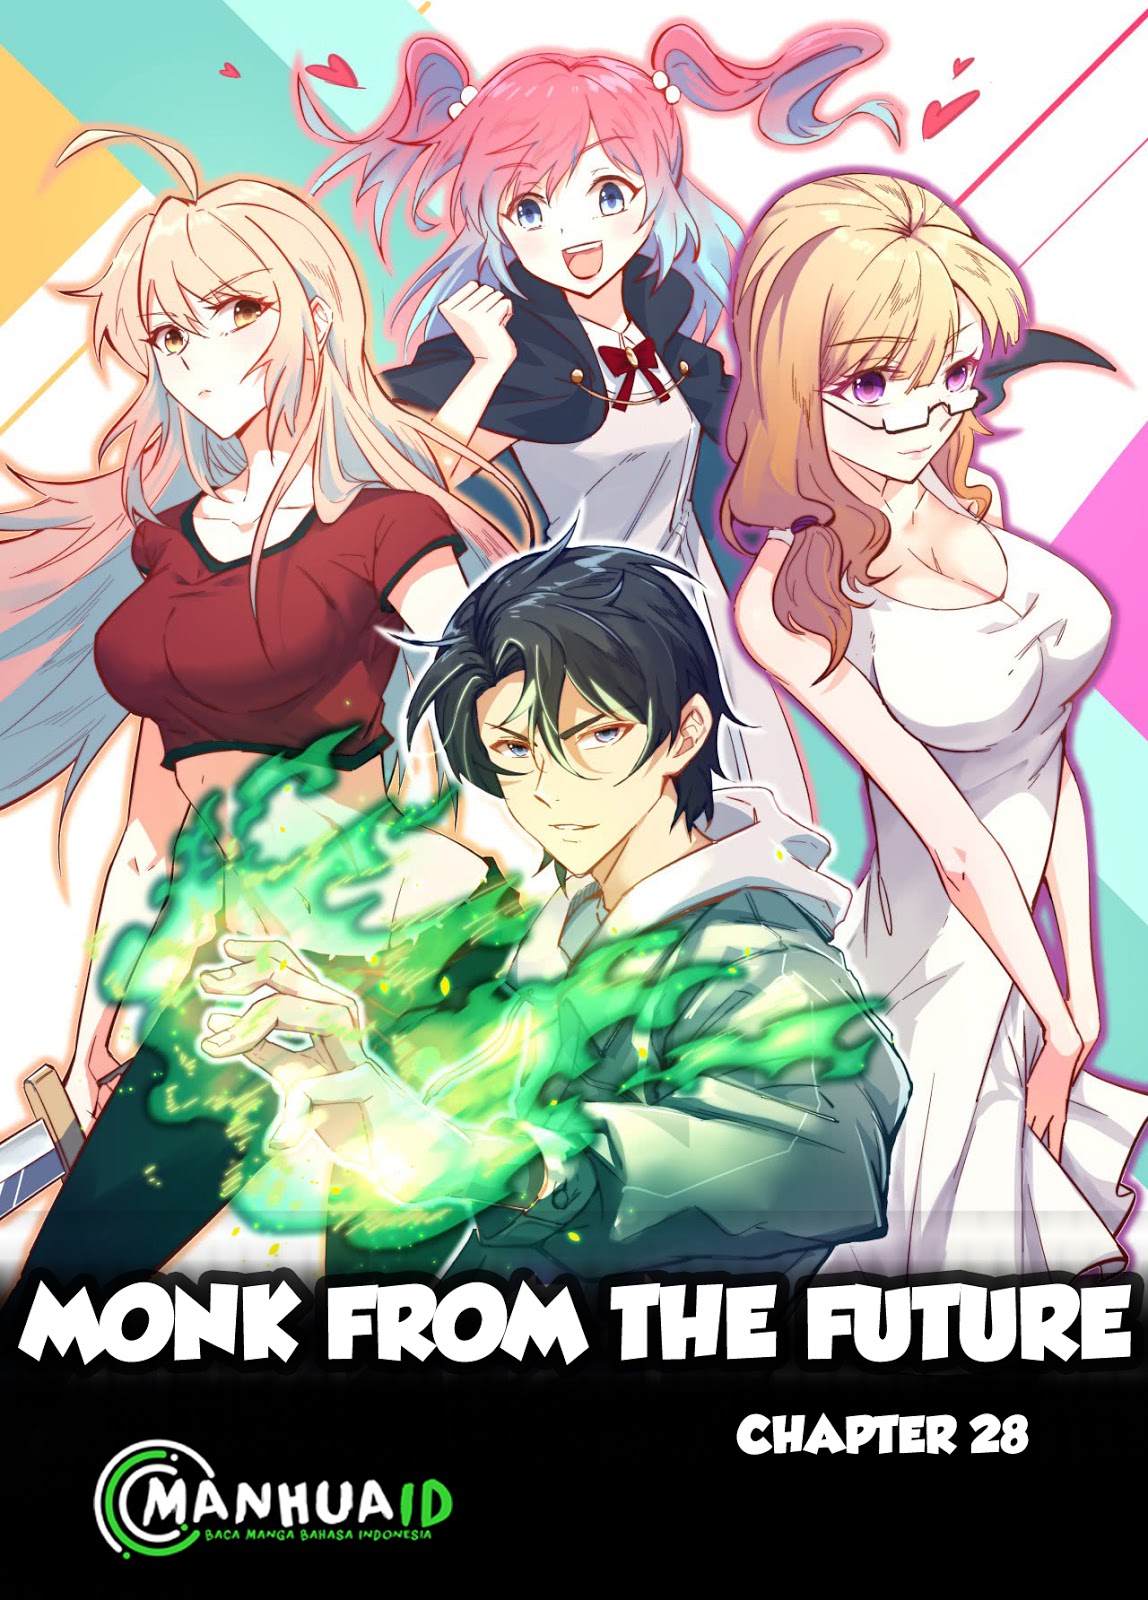 Monk From the Future Chapter 28